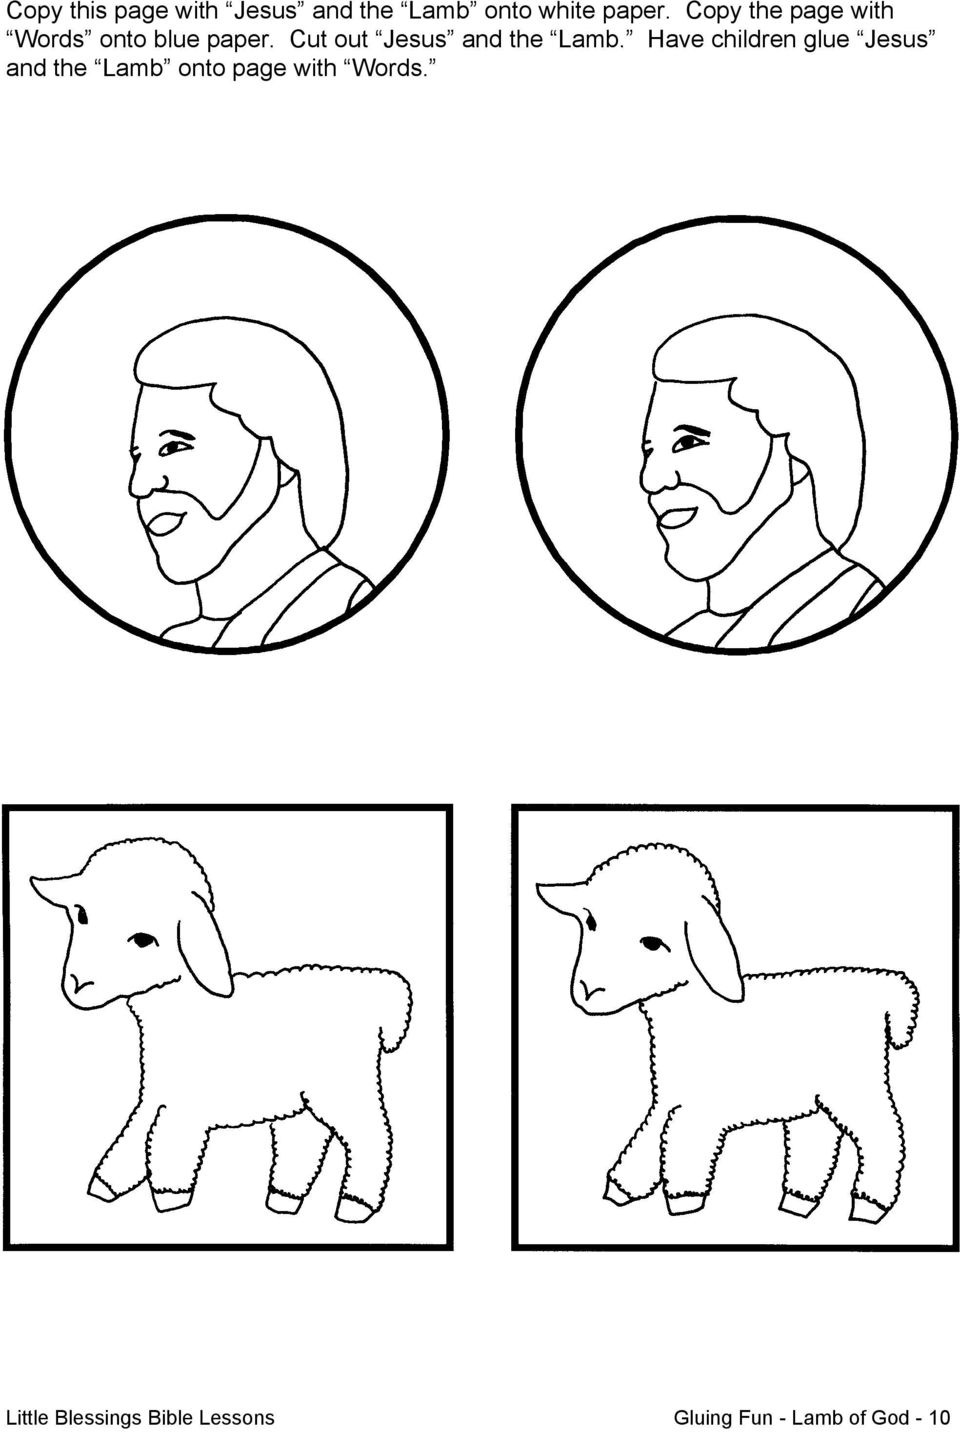 Cut out Jesus and the Lamb.